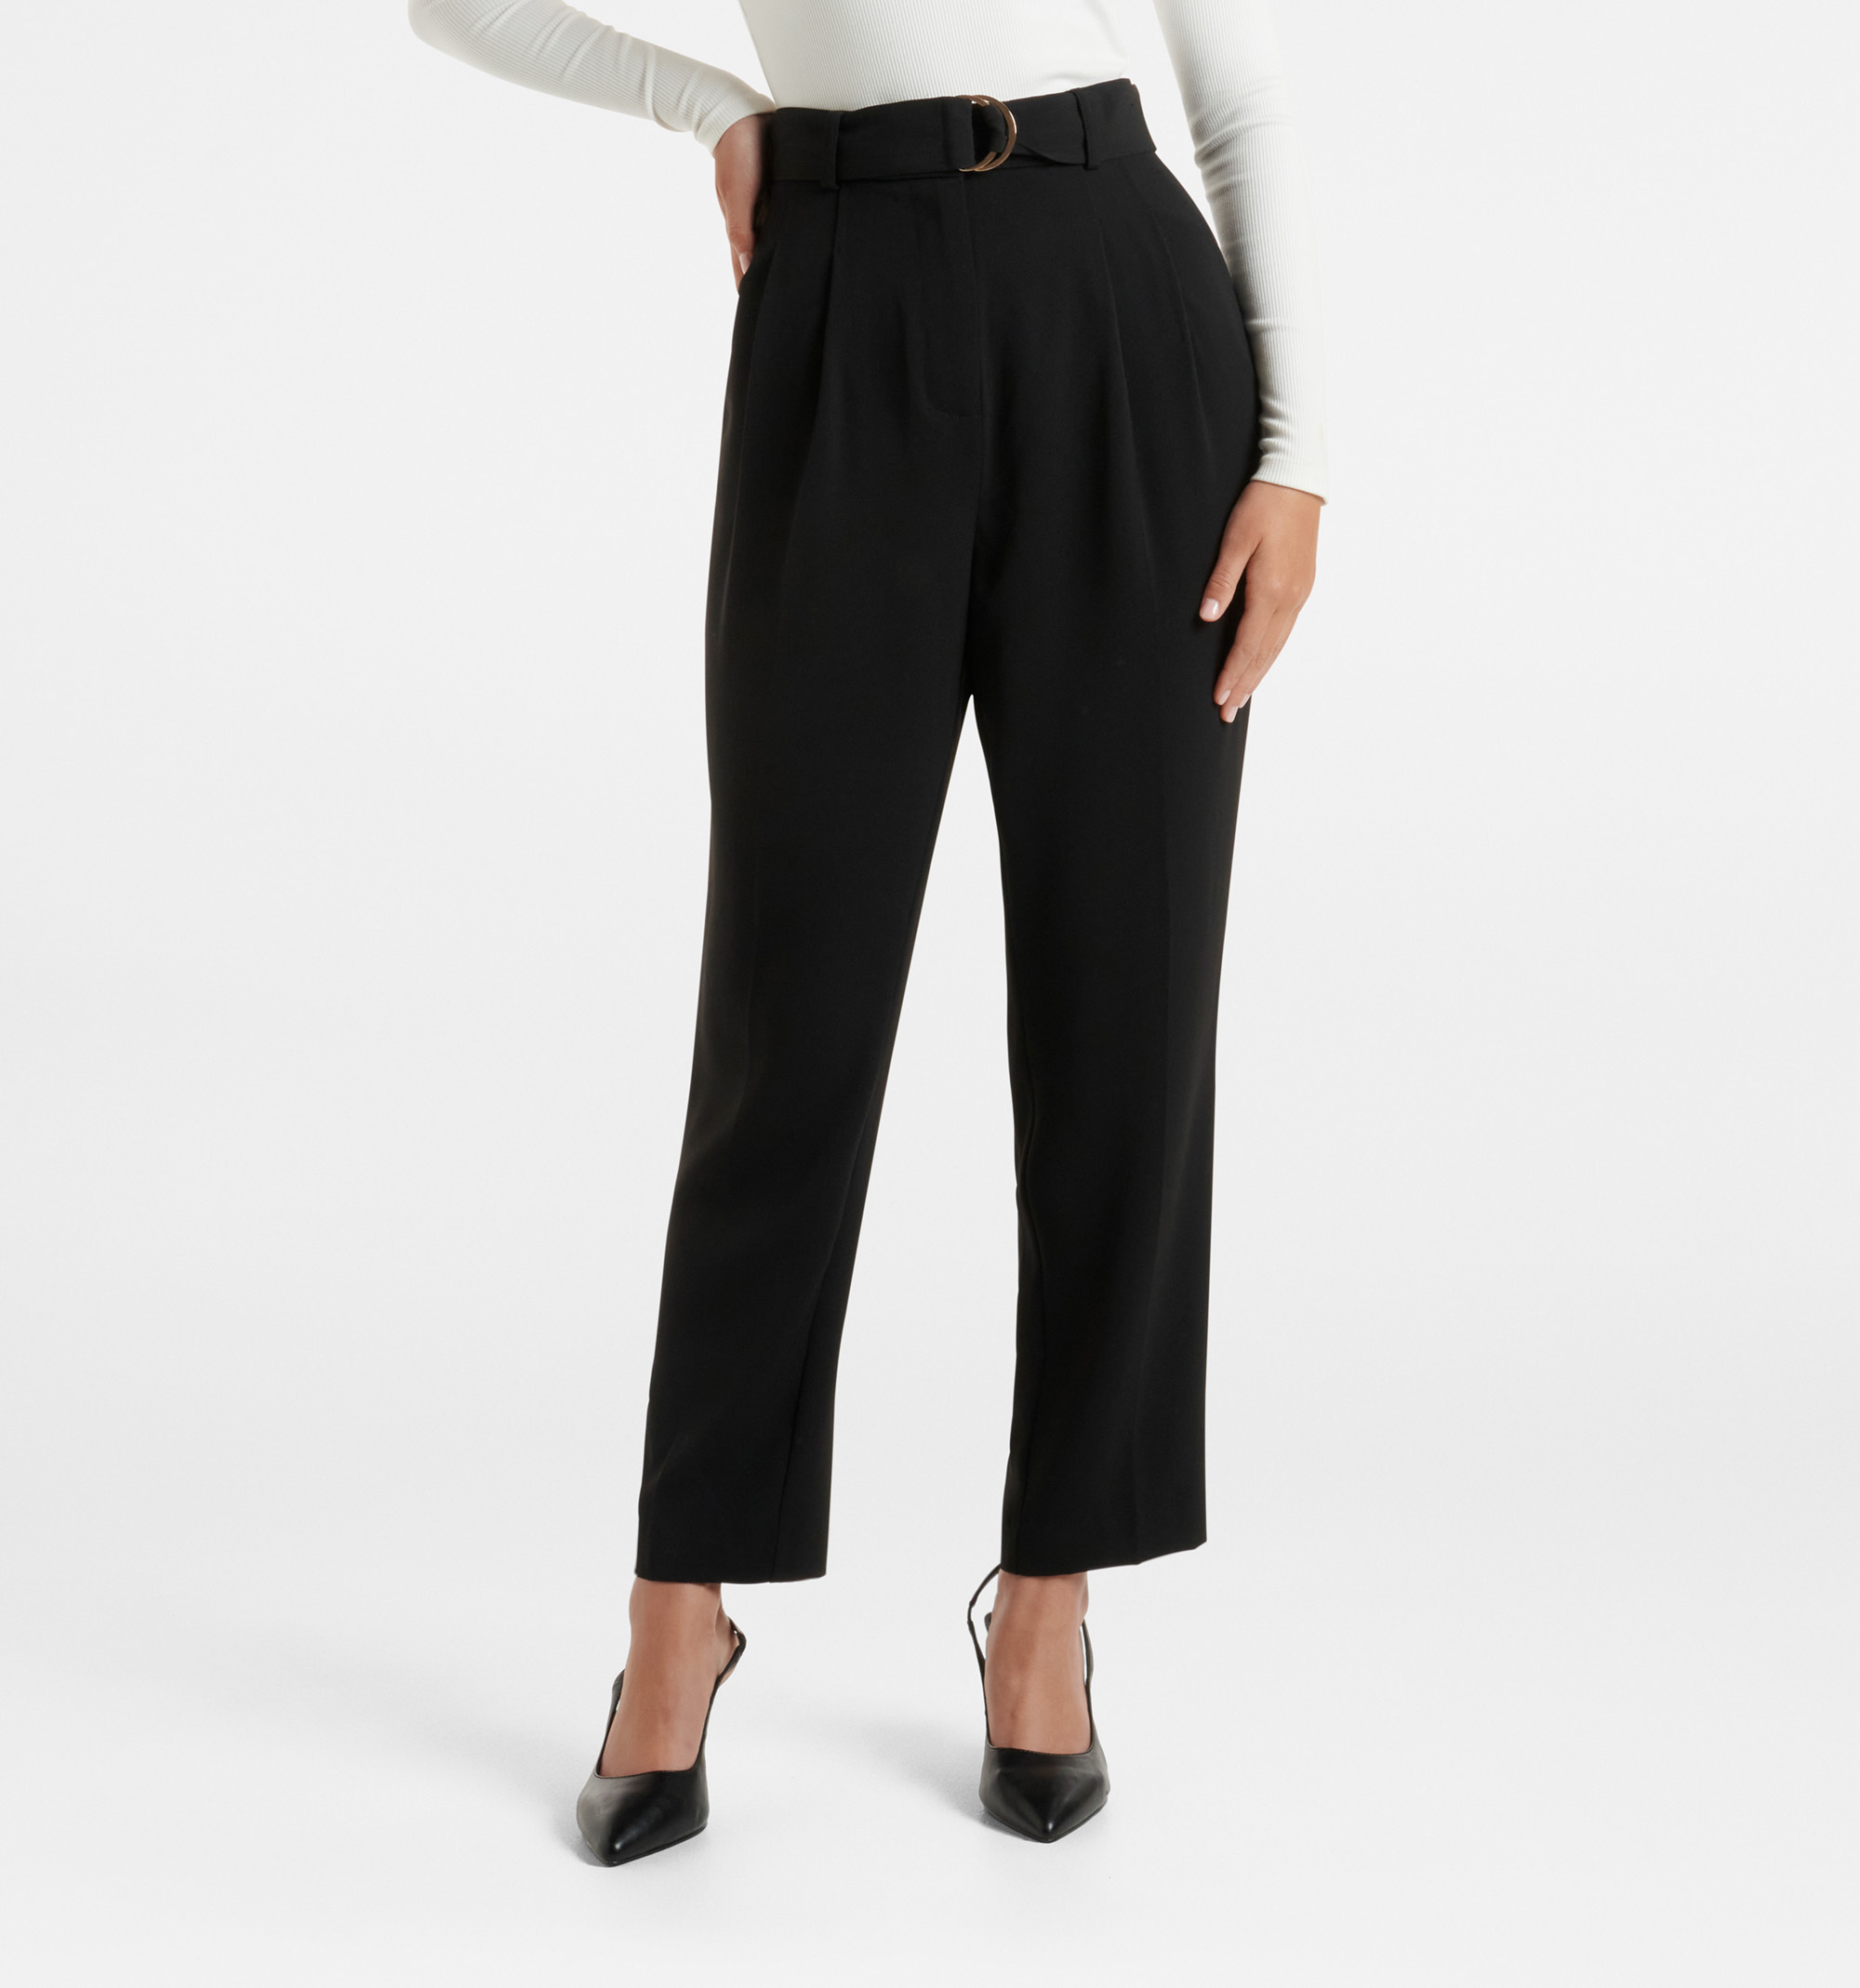 Tailor To You Belted High Waisted Trousers – Oh Polly UK